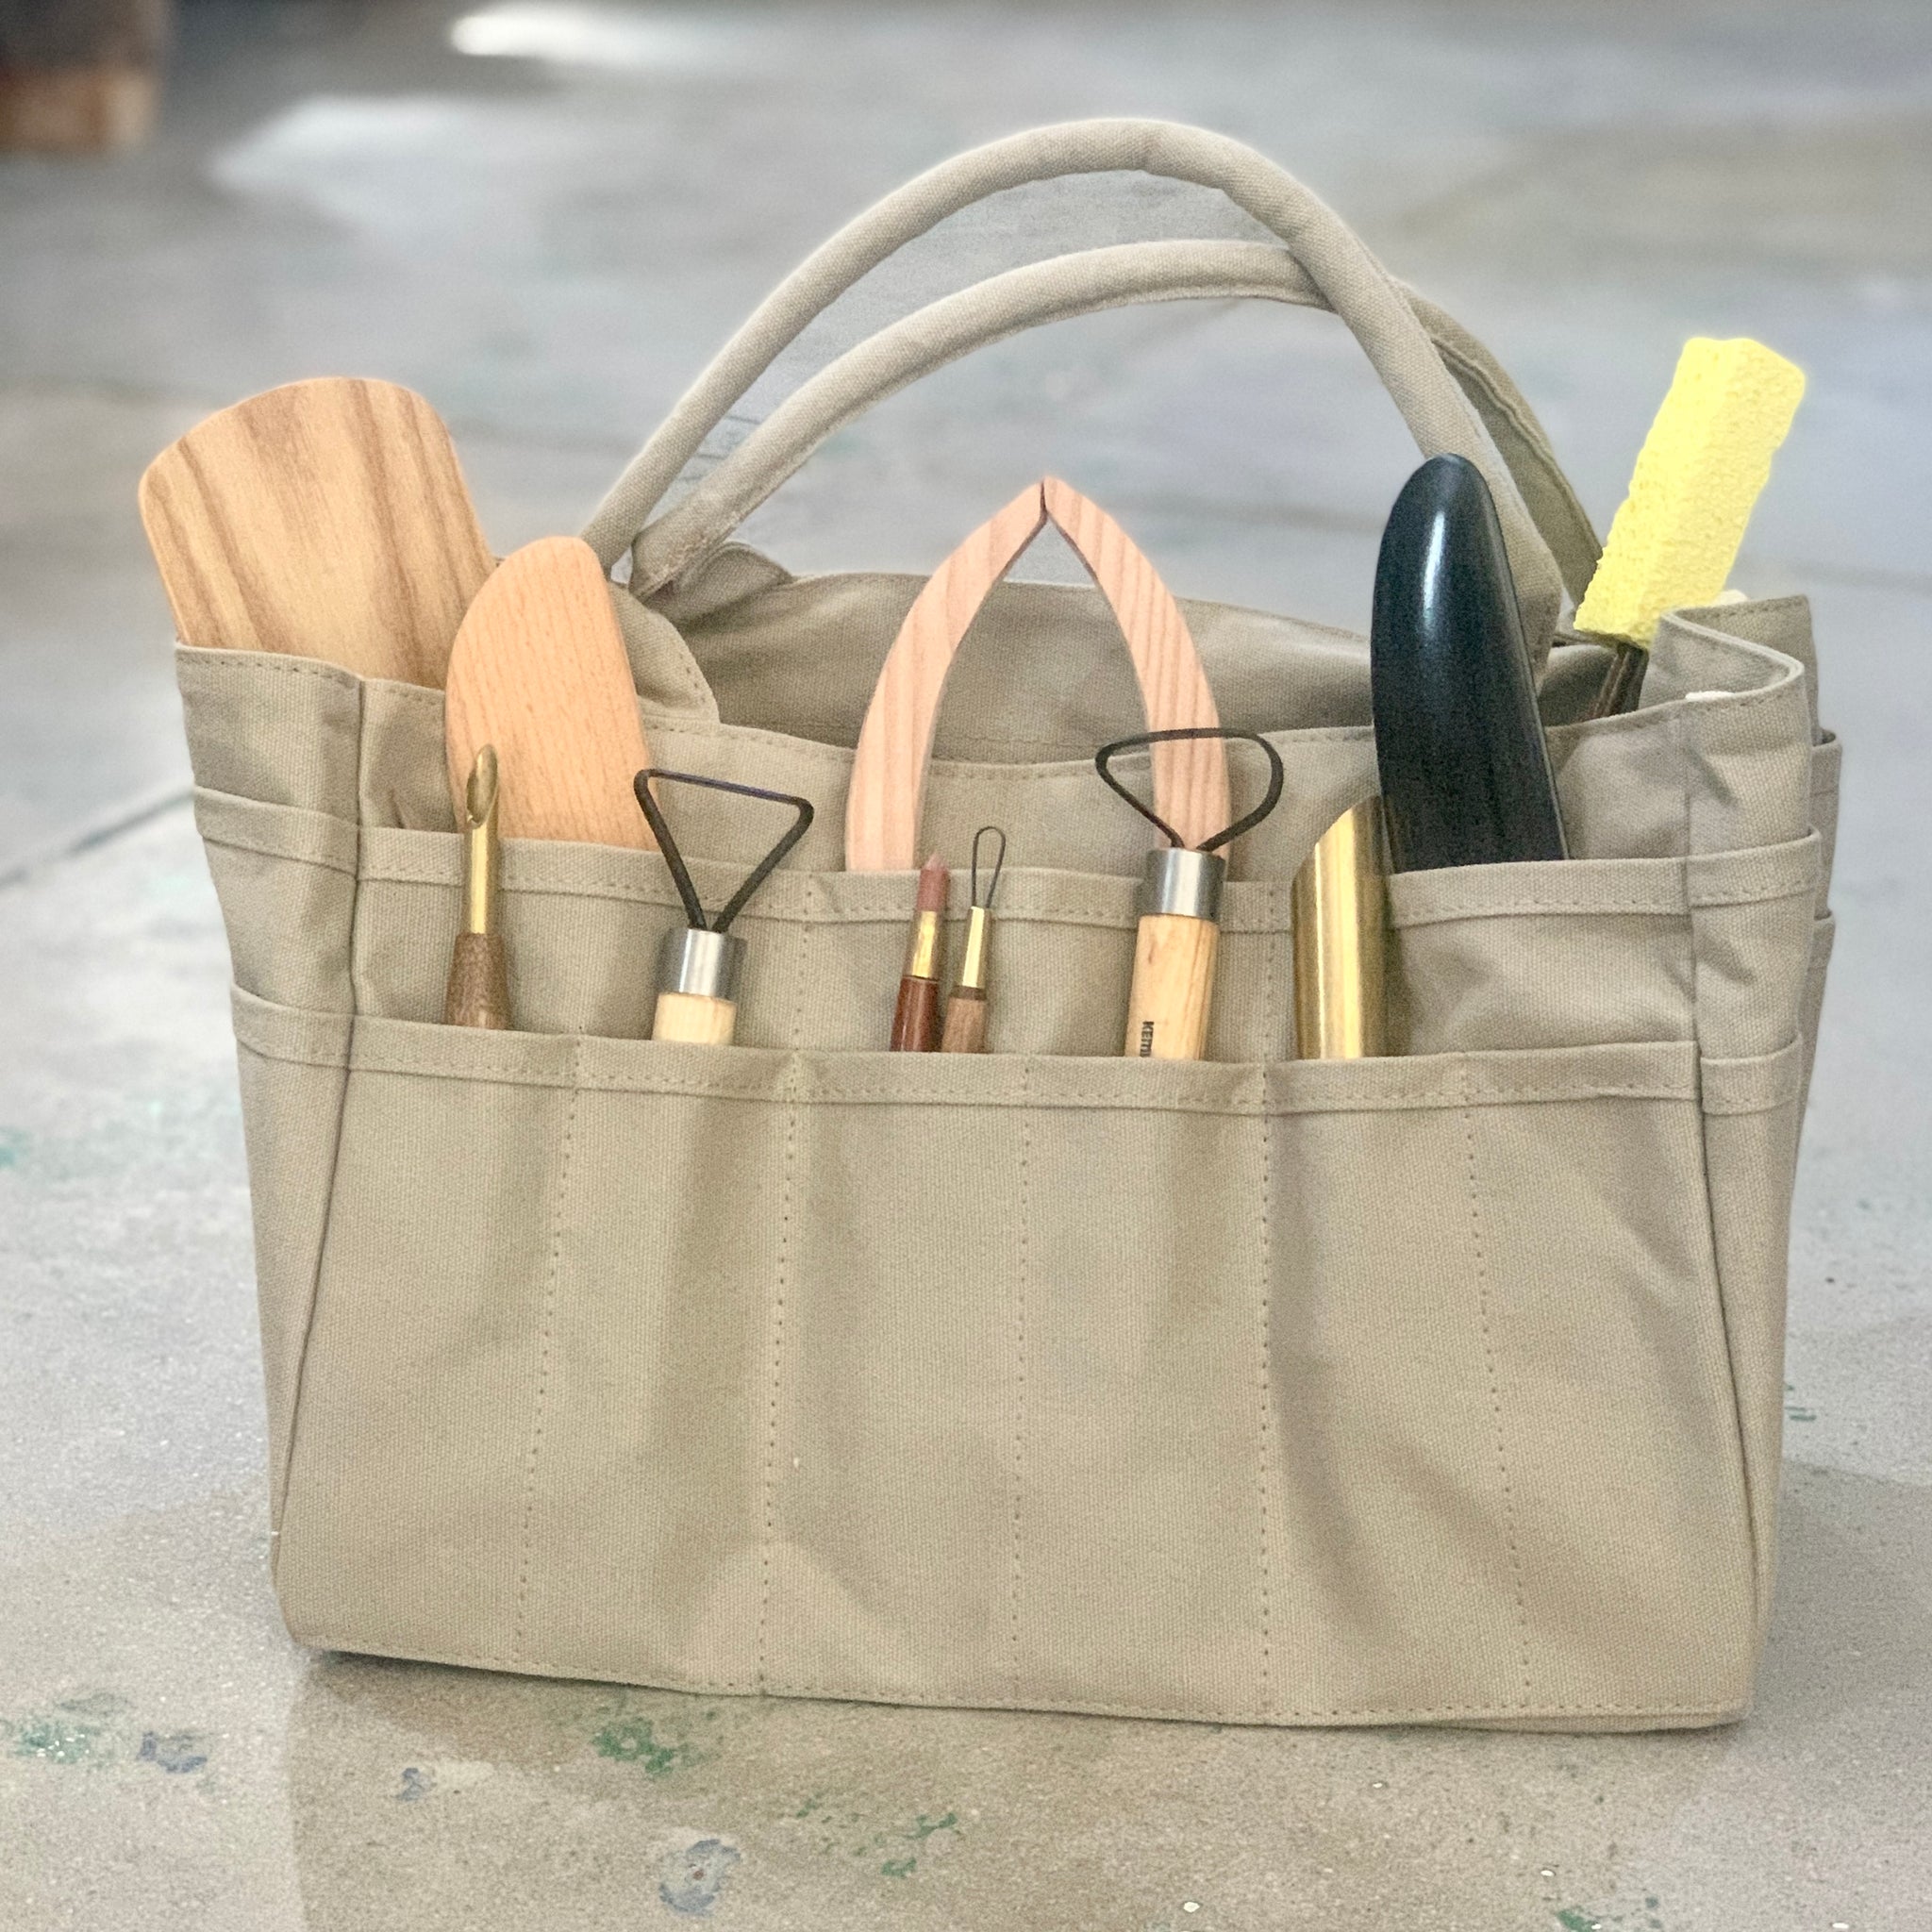 Potter's Canvas Tool Bag – The Pottery Studio